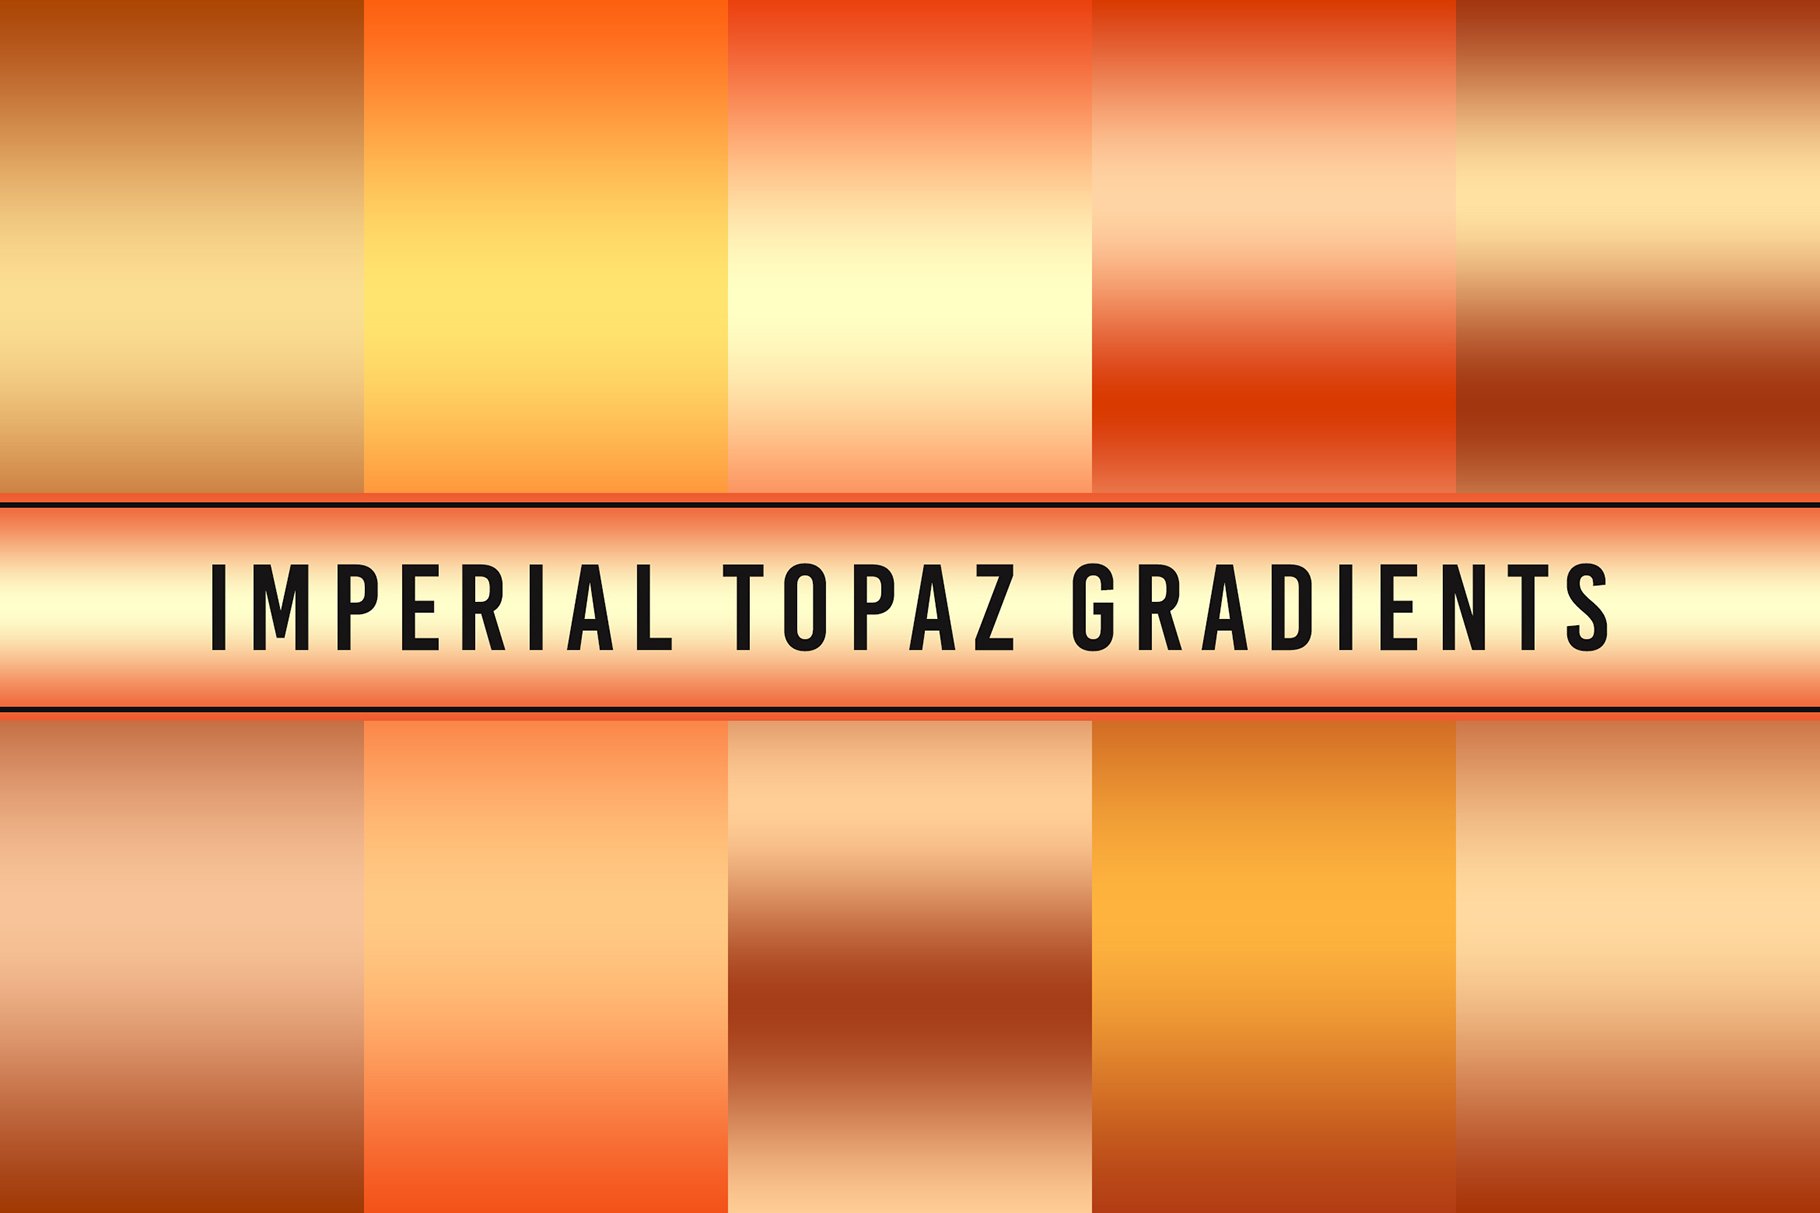 Imperial Topaz Gradientscover image.